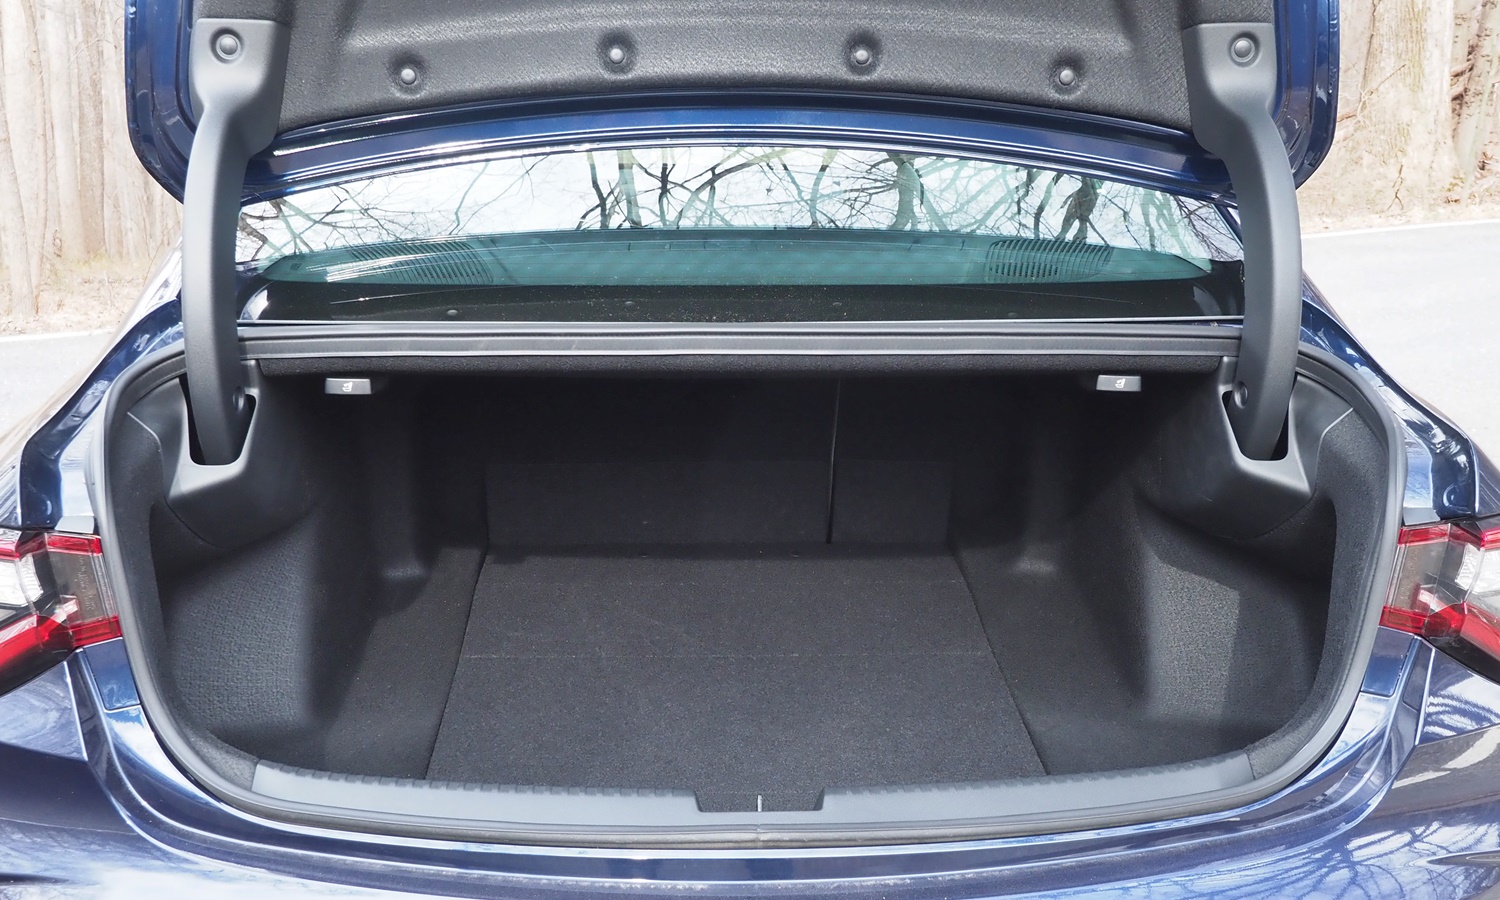 TLX Reviews: Acura TLX trunk